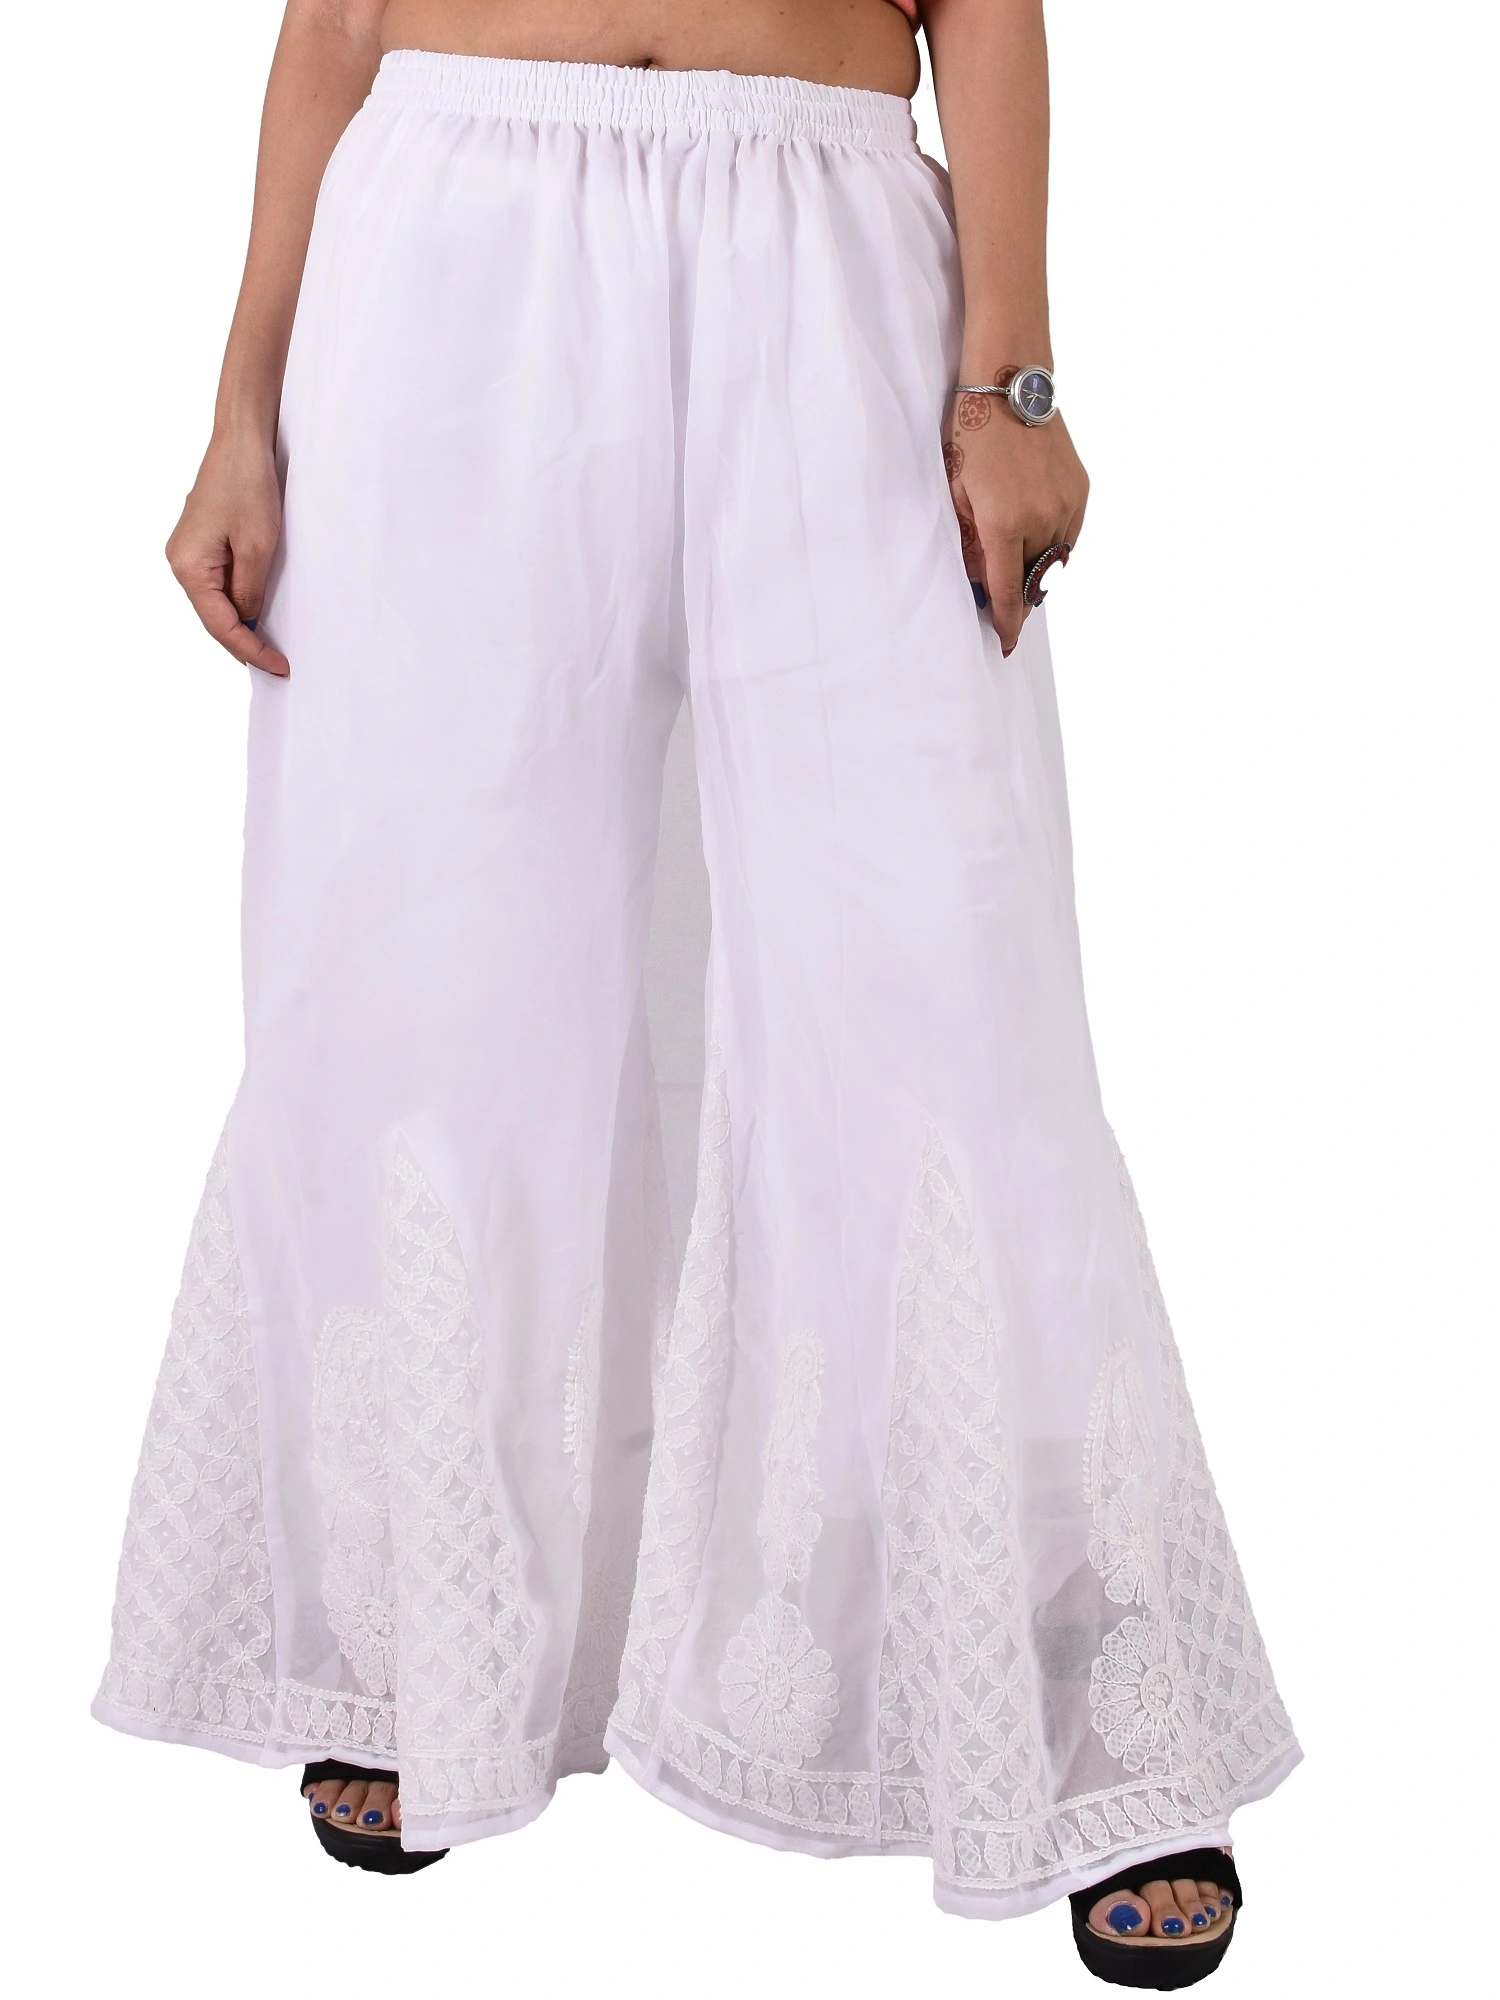 Lavangi Women Lucknow Chikan Embroidery White Chiffon Palazzo with attached cotton Lining